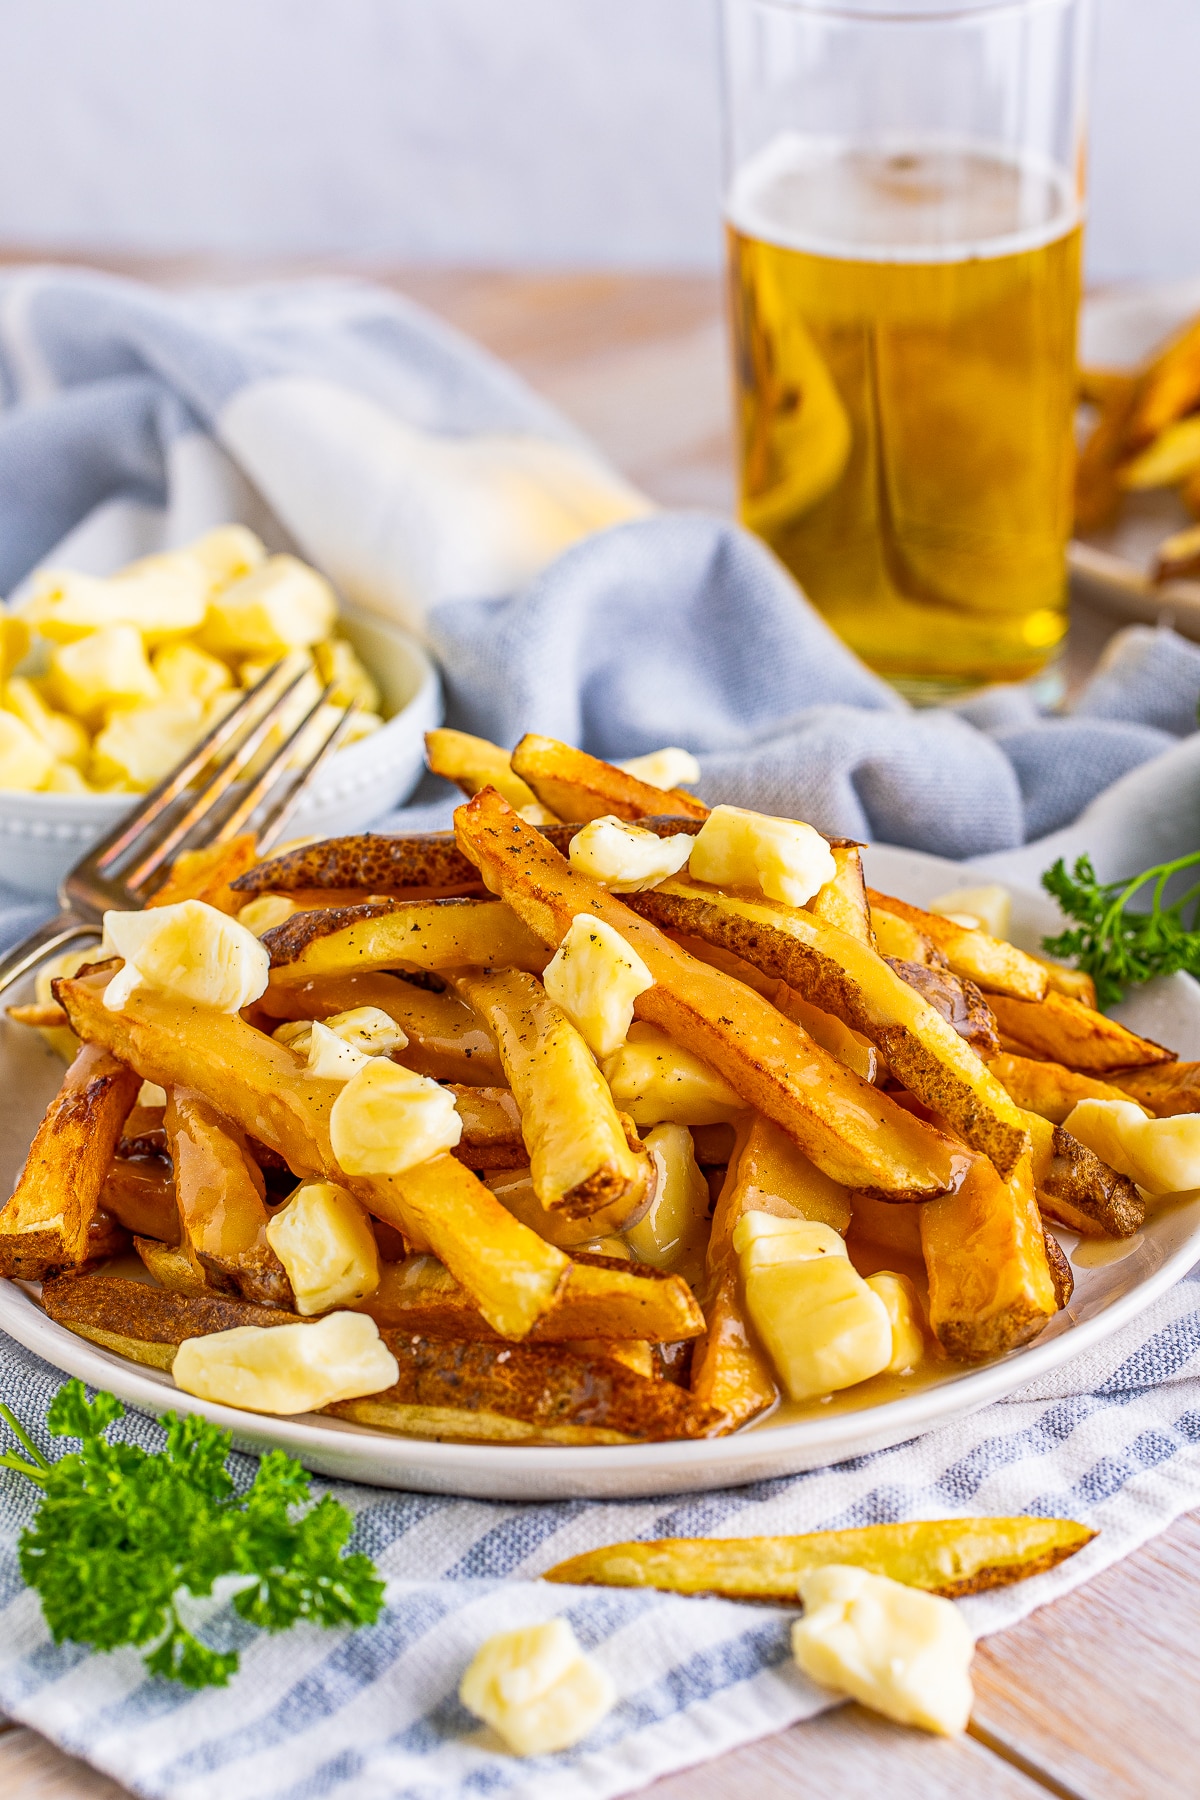 Poutine Recipe on white plate with blue linen